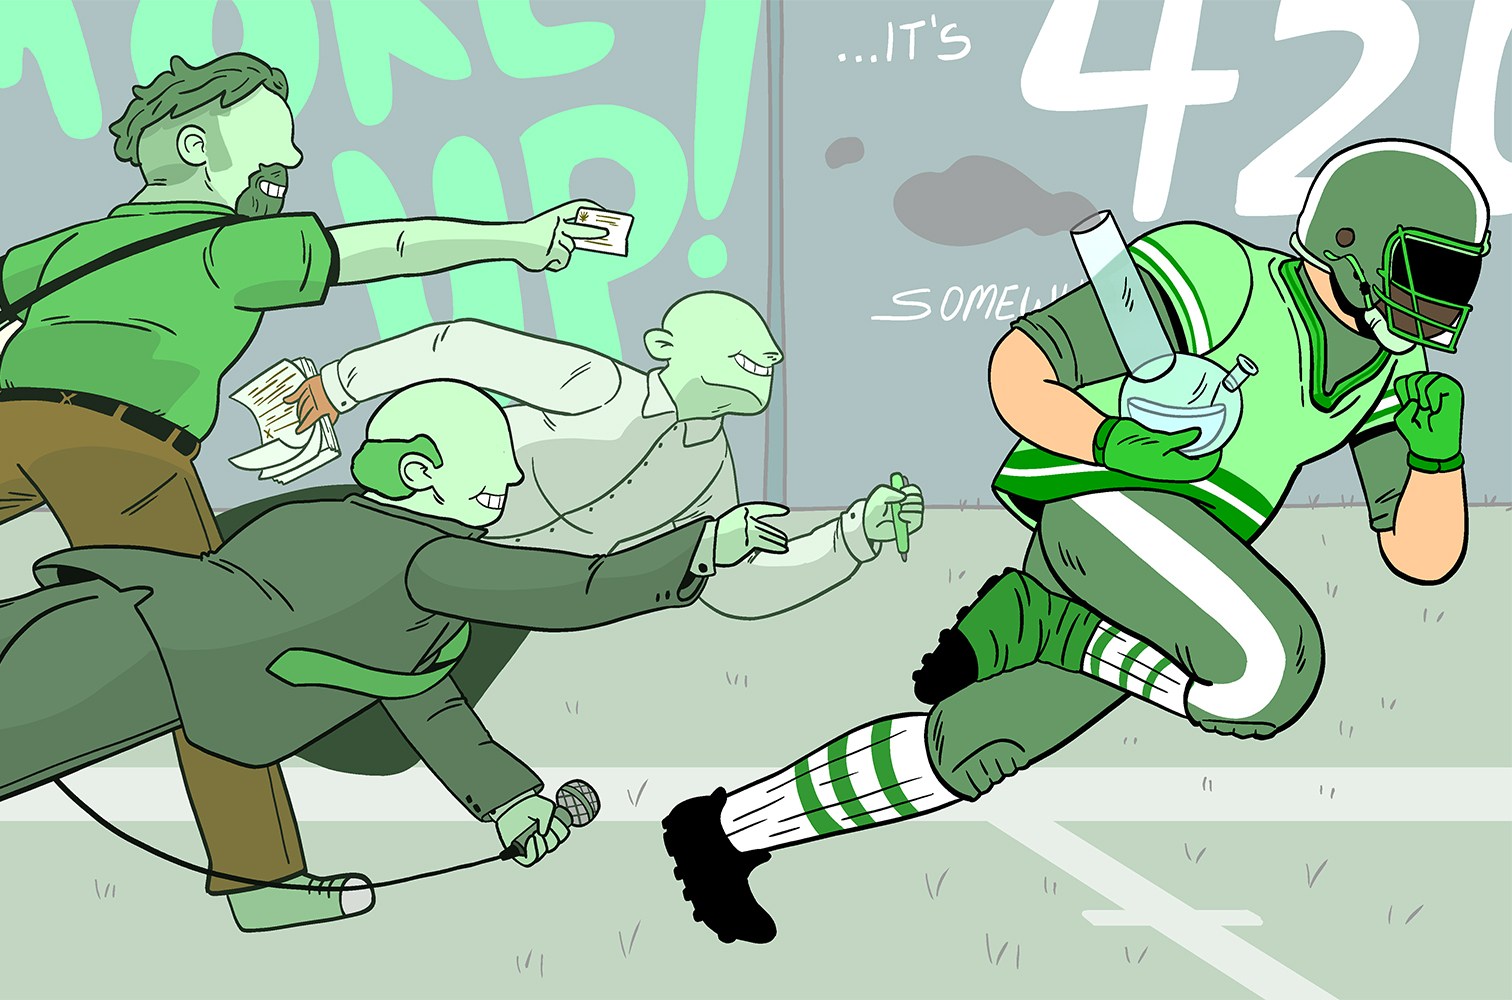 Drawing of cannabis industry people chasing after a football player.